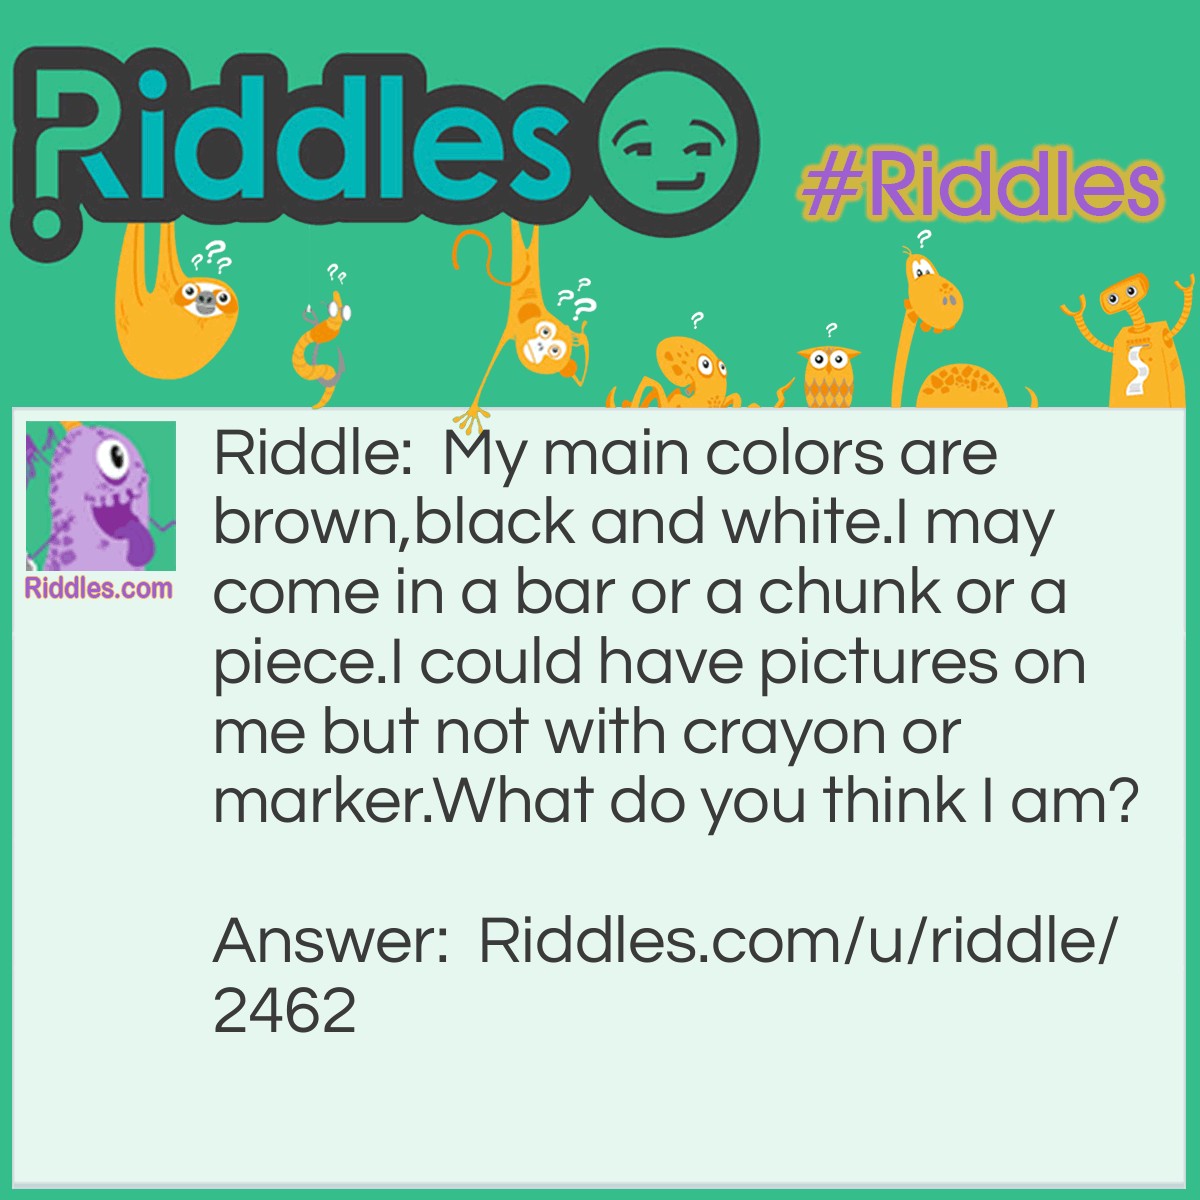 Riddle: My main colors are brown,black and white. I may come in a bar or a chunk or a piece. I could have pictures on me but not with crayon or marker. What do you think I am? Answer: I am chocolate.